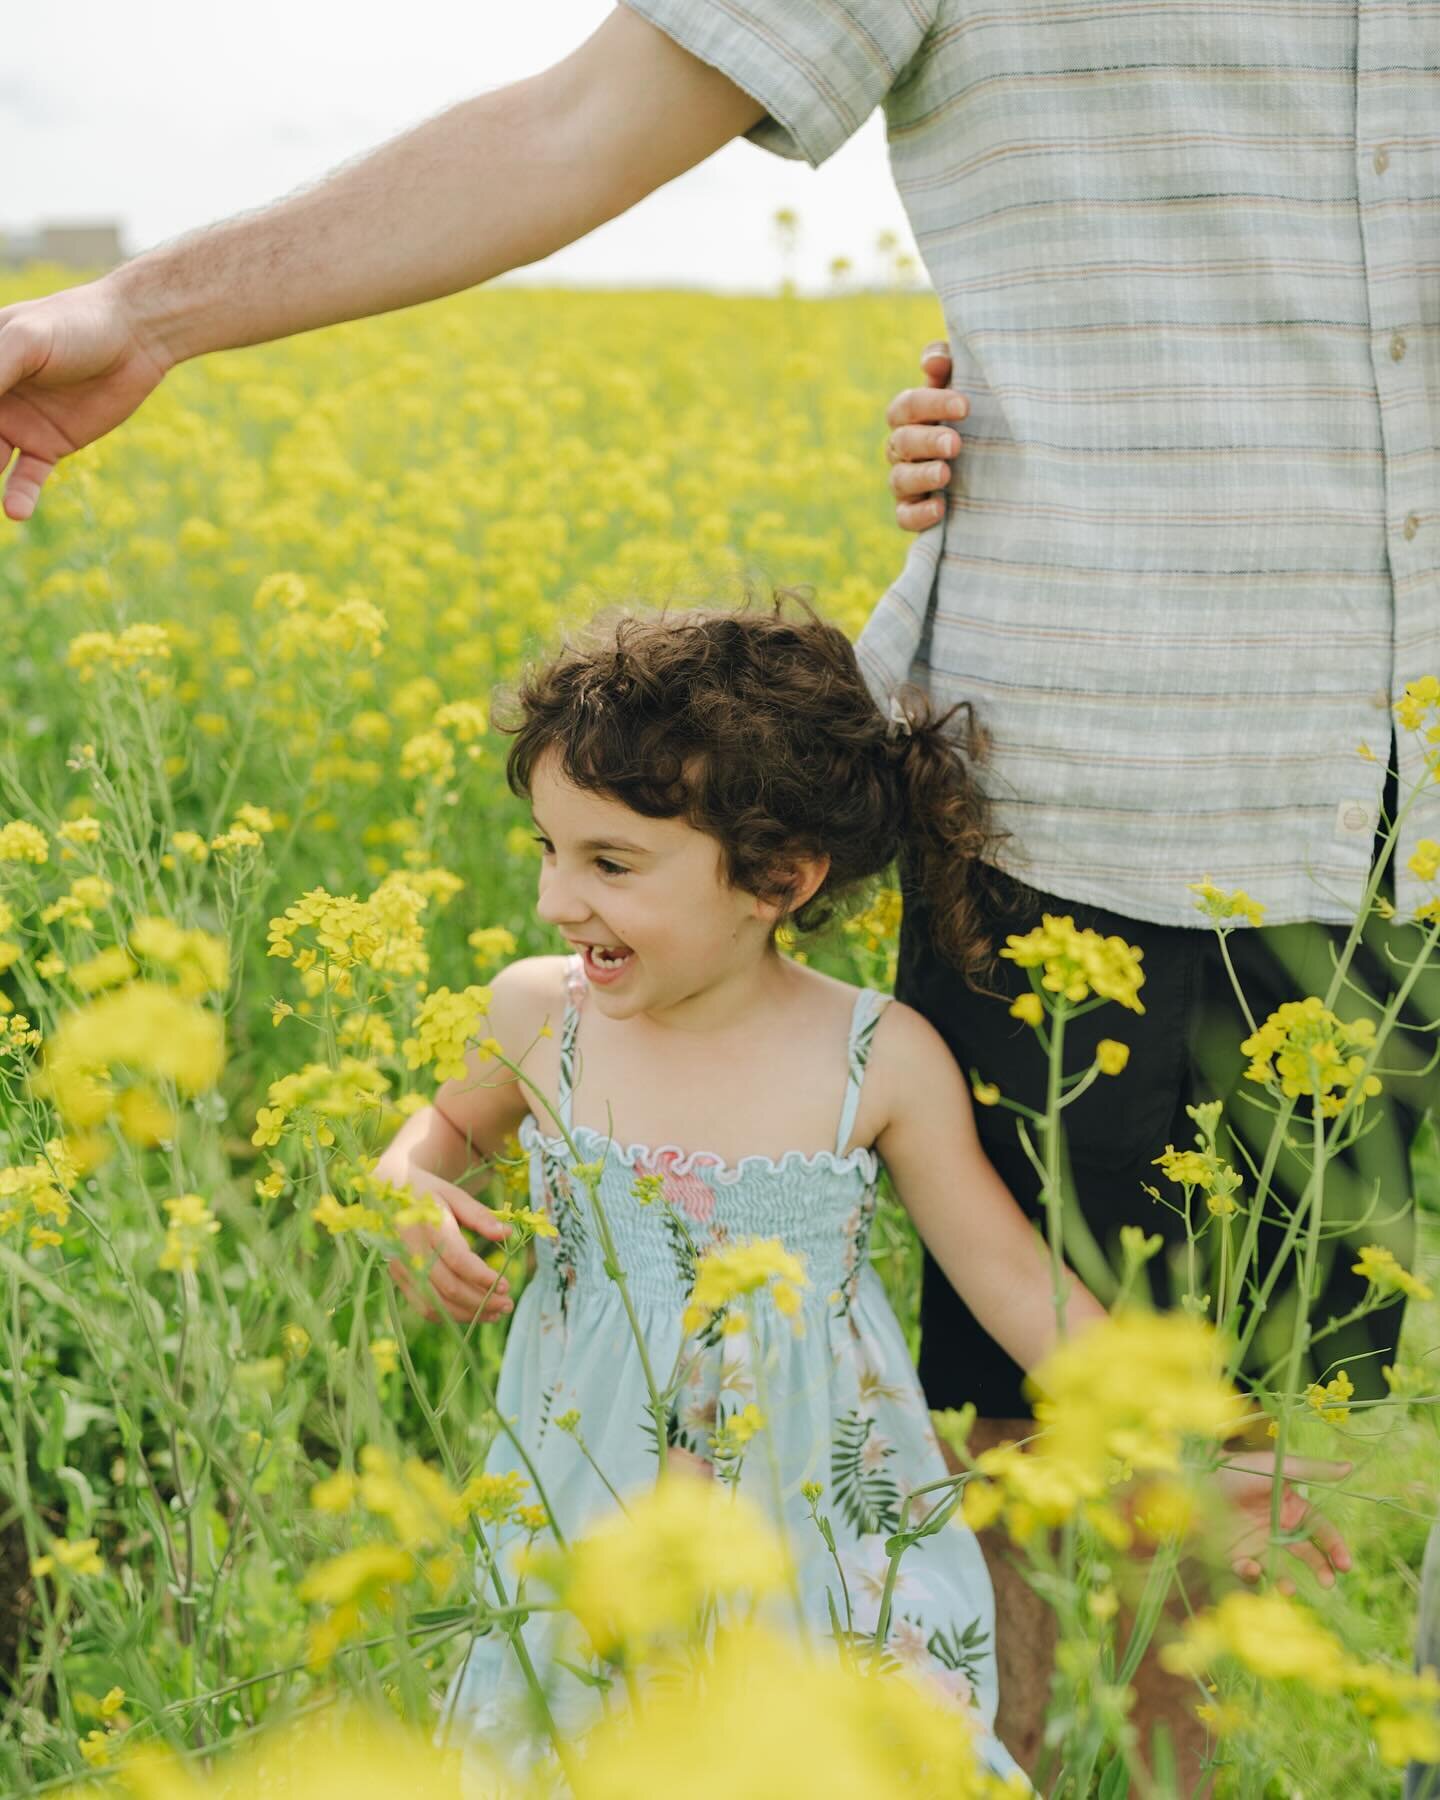 Family photos are all about being your authentic selves and enjoying time together. Come as you are &amp; embrace the chaos. Loved capturing some moments of my sweet nieces dancing around in a field this week🫶🏼